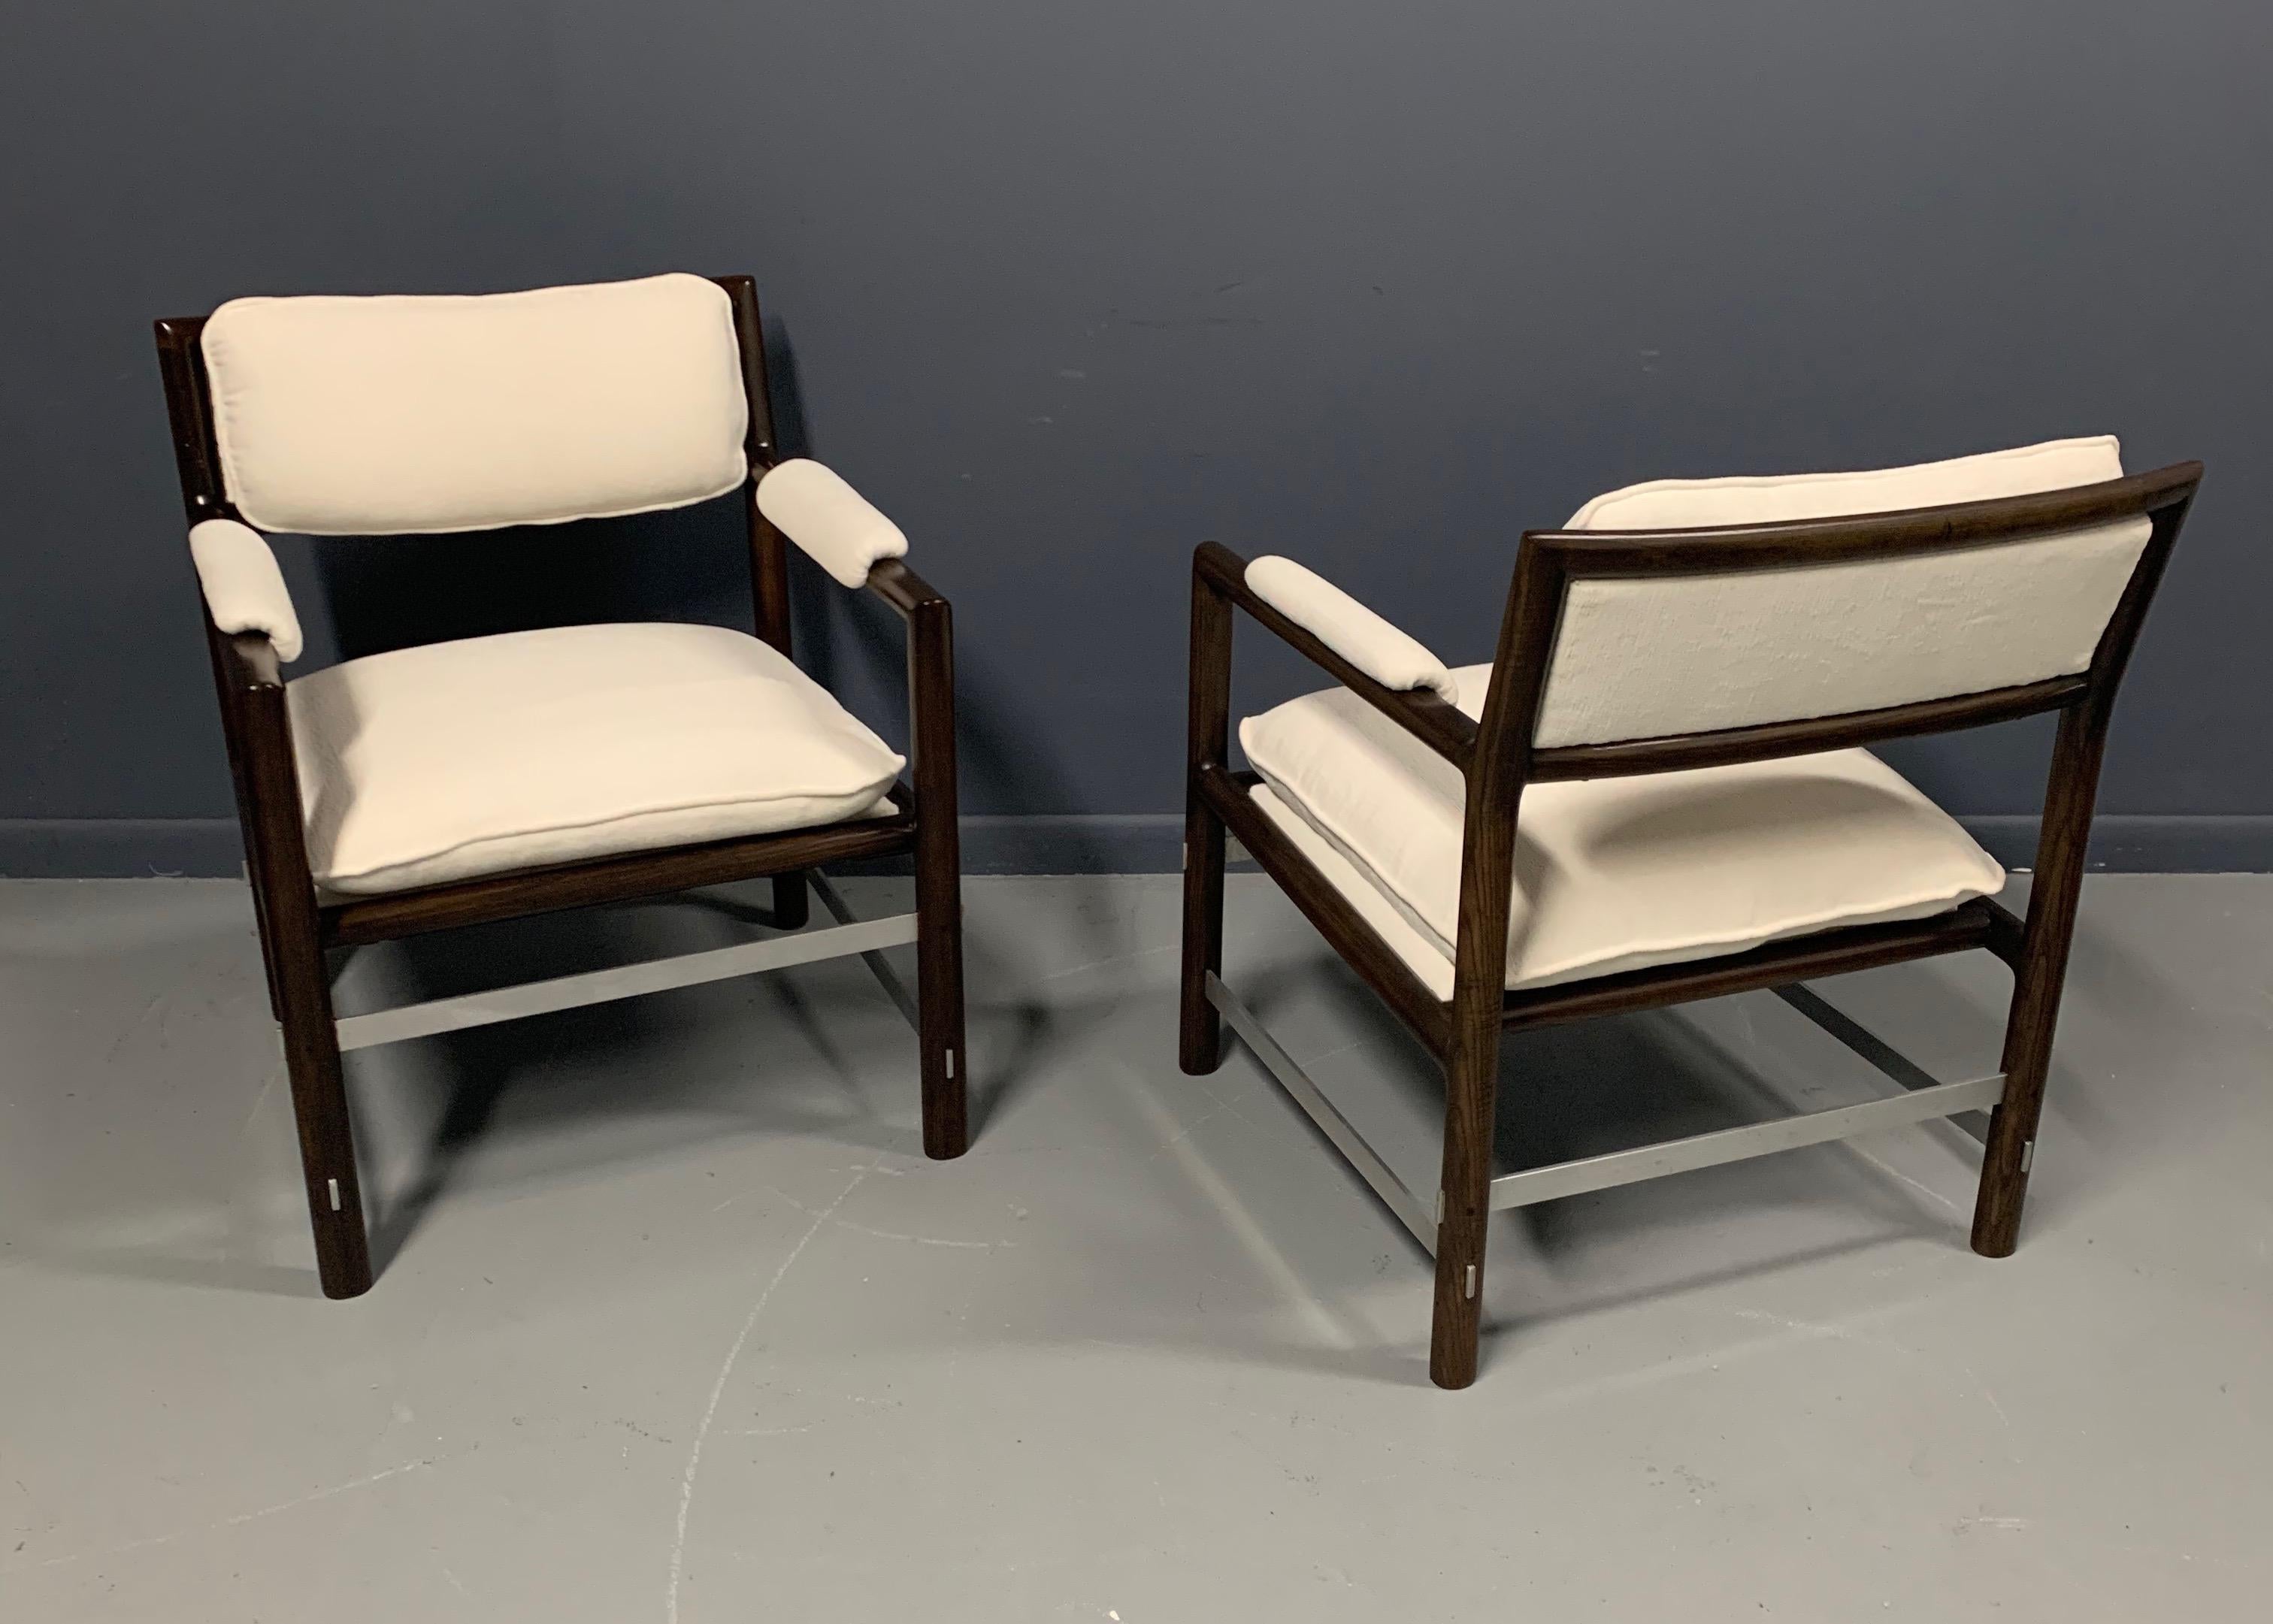 Mahogany Edward Wormley Pair of Outstanding Armchairs for Dunbar in Velvet Mid Century